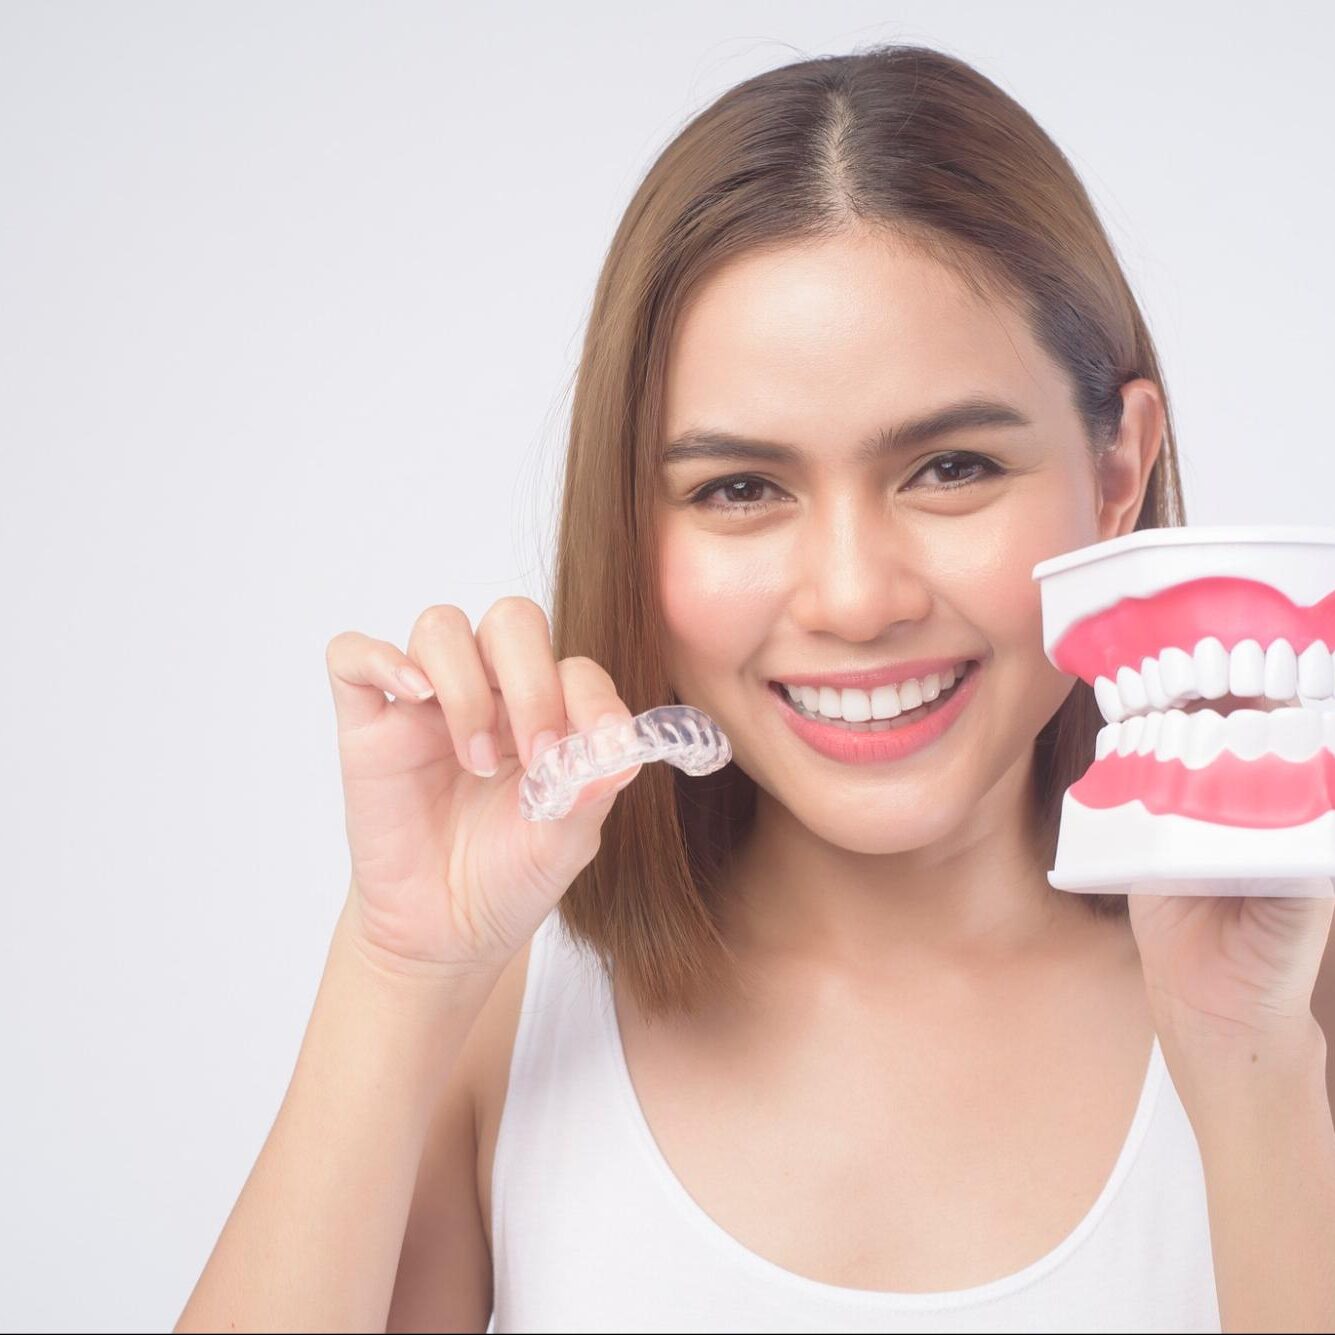 How to Get The Most Out of Aligner Treatment